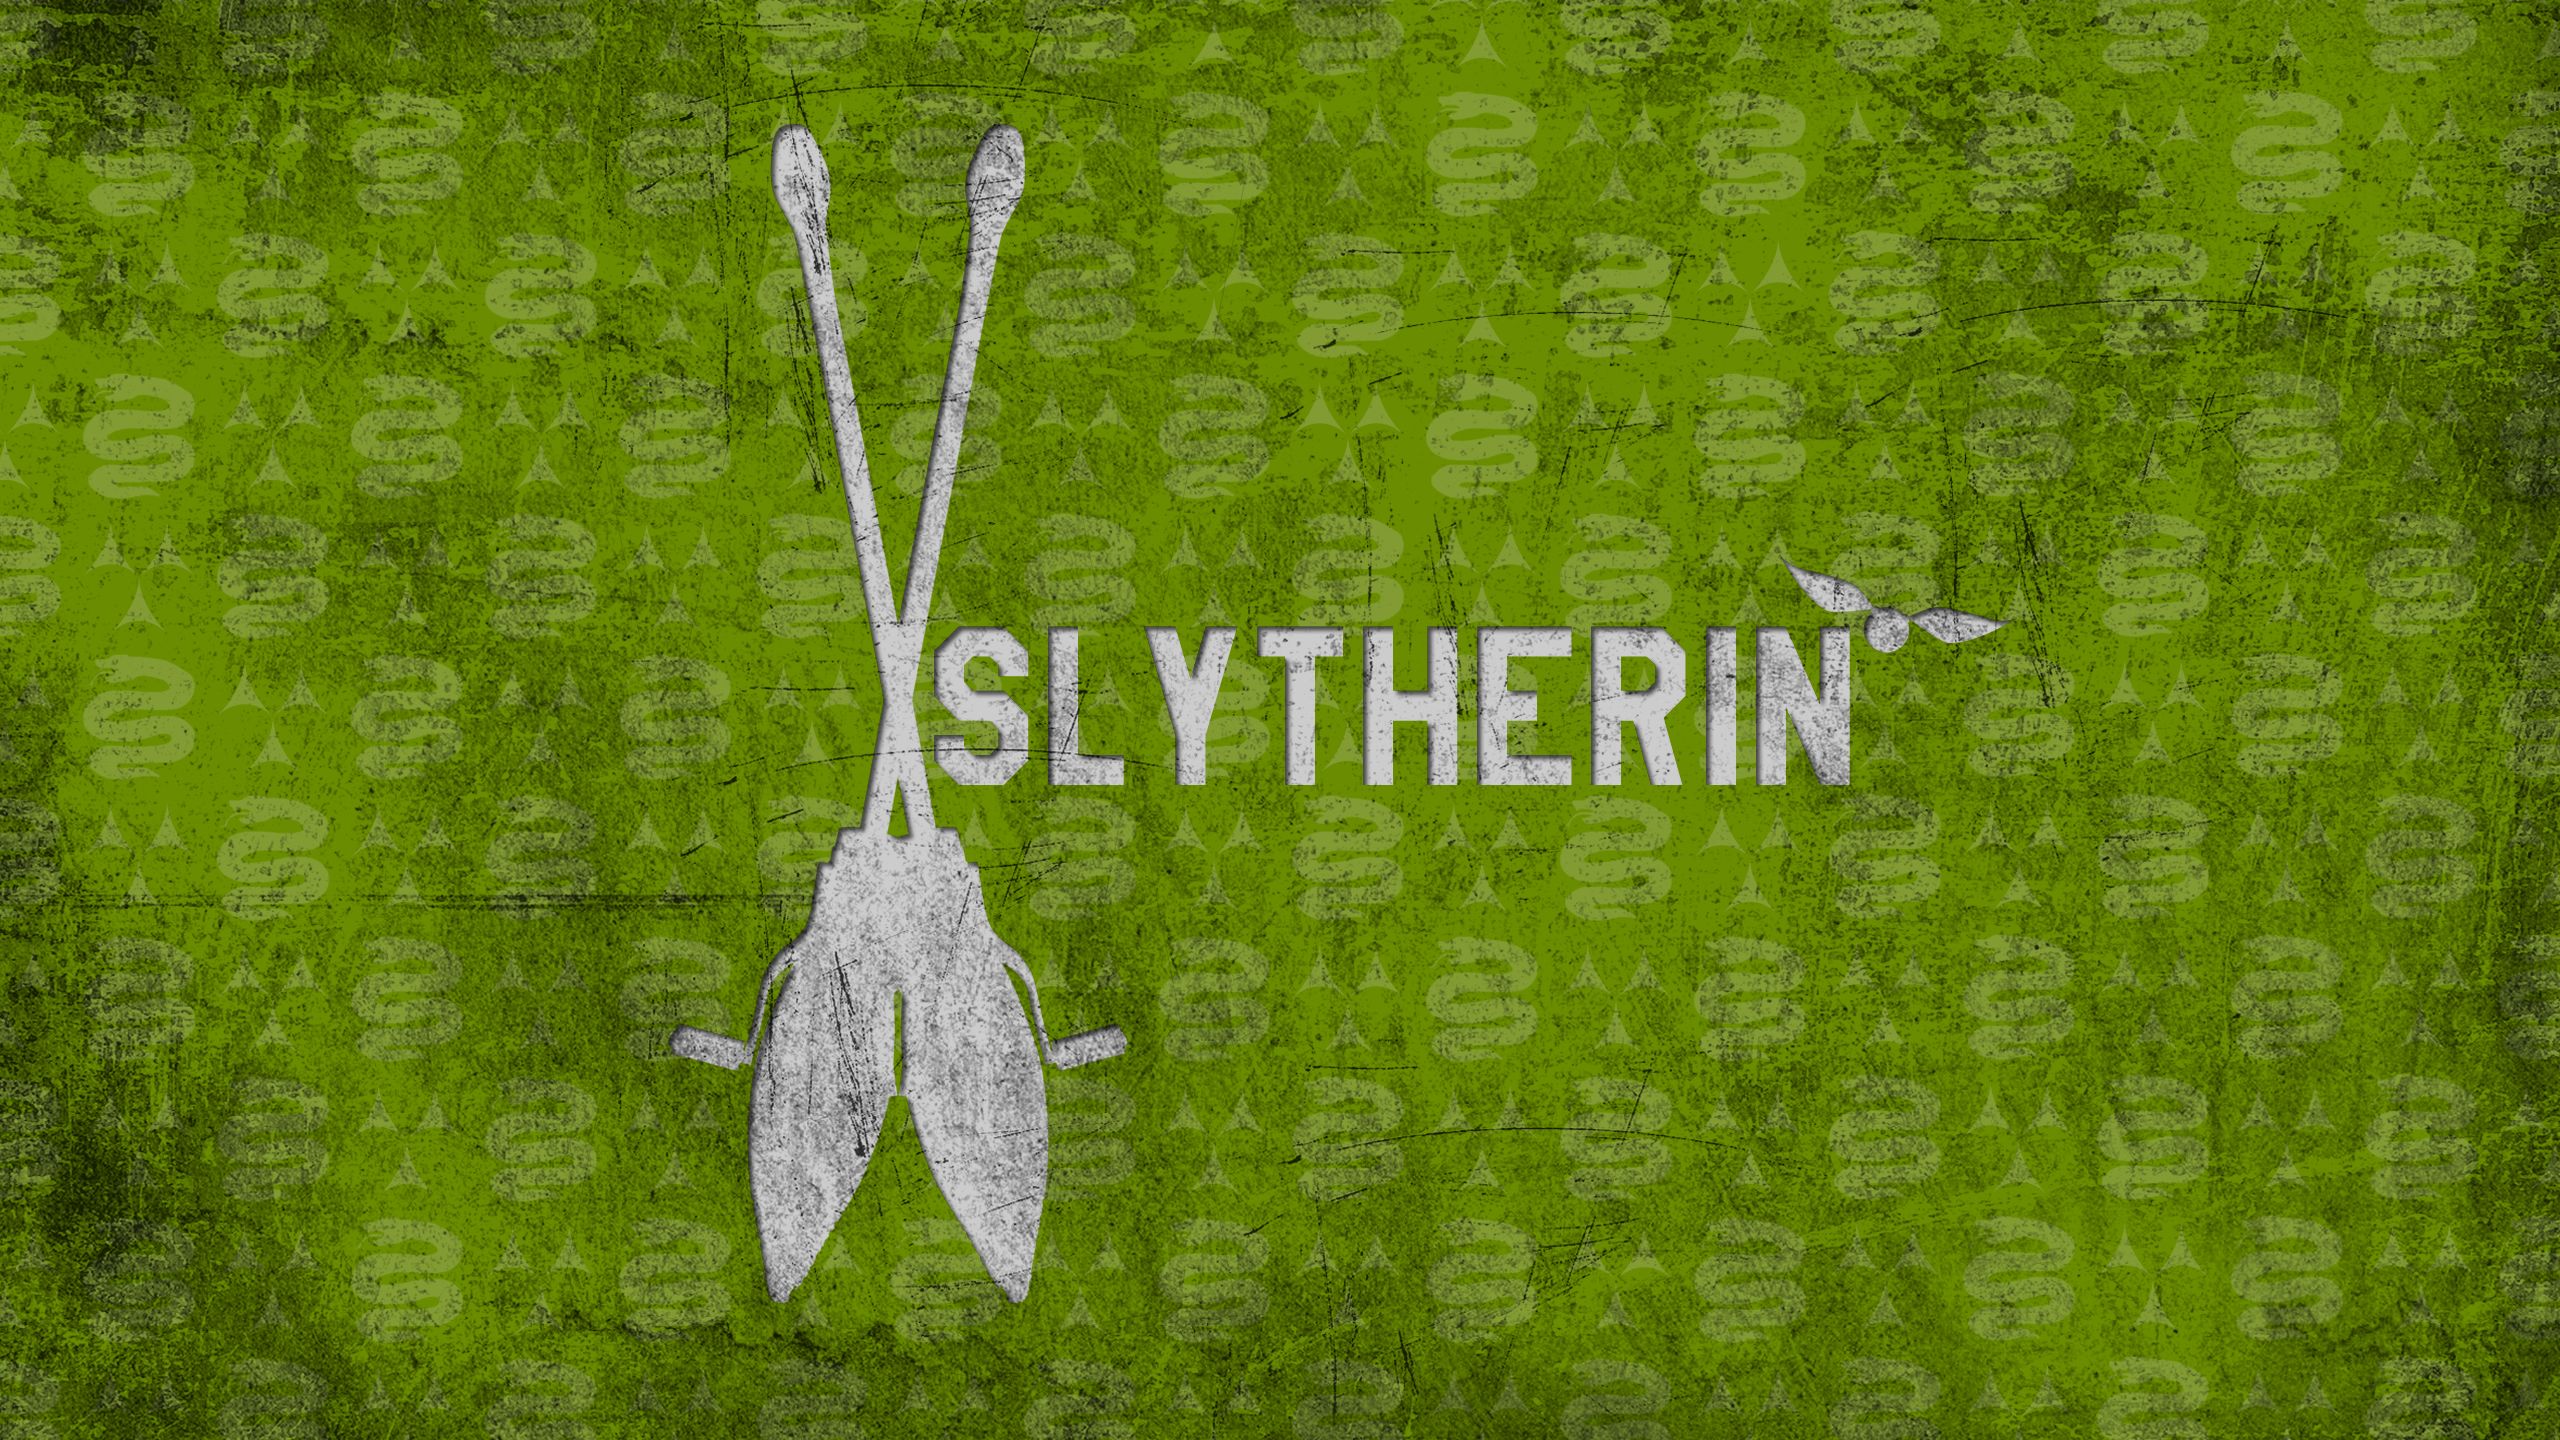 Slytherin Wallpaper Clearance  anuariocidoborg 1692756056